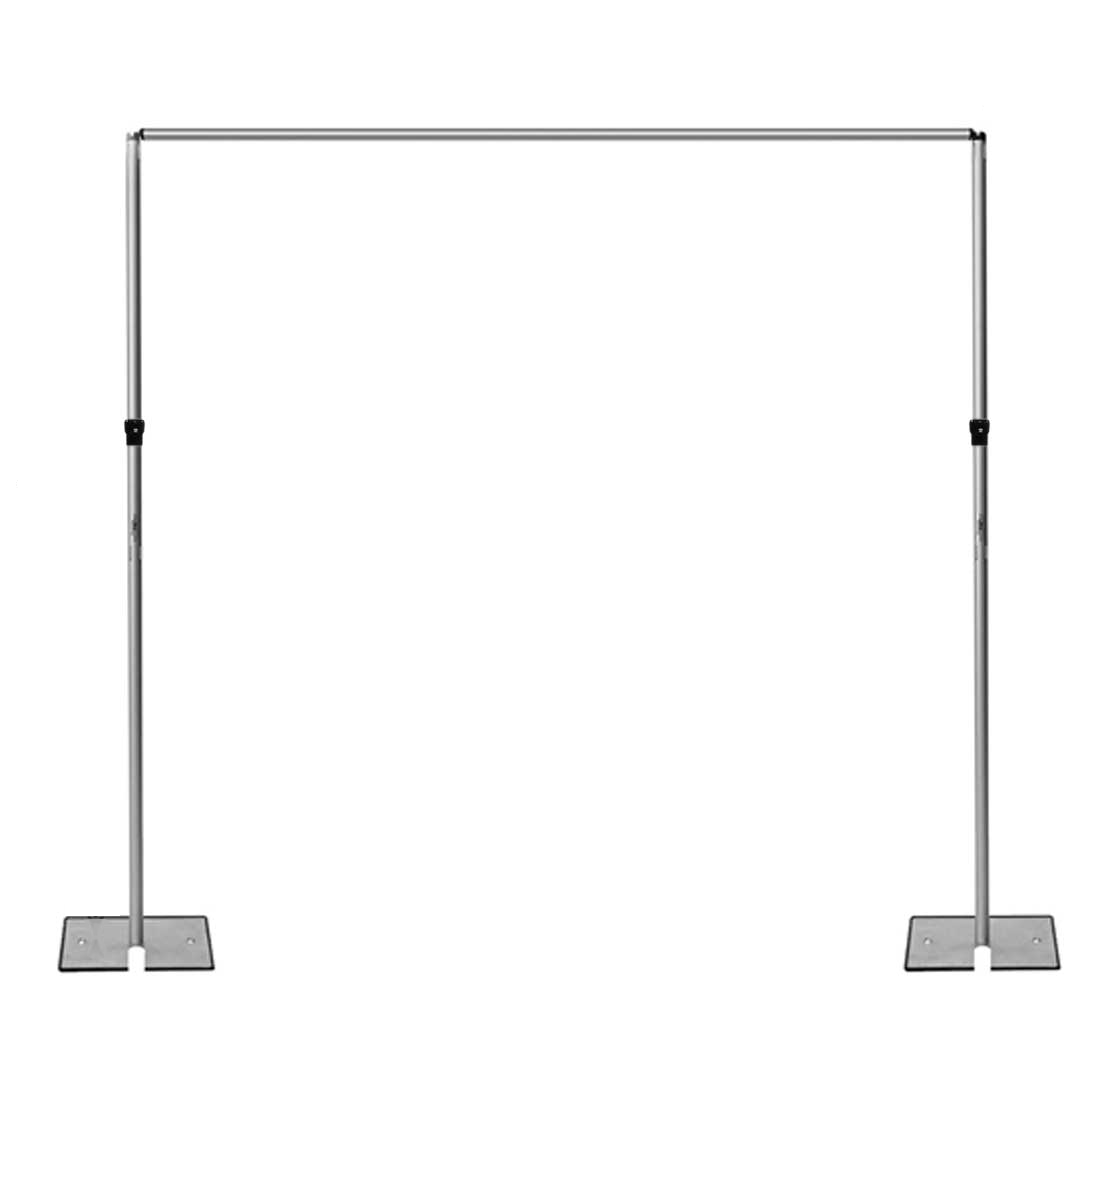 High x 4 Ft 12 Ft - White For Pipe and Drape Displays and Backdrops Wide Banjo Drape Panel off white 